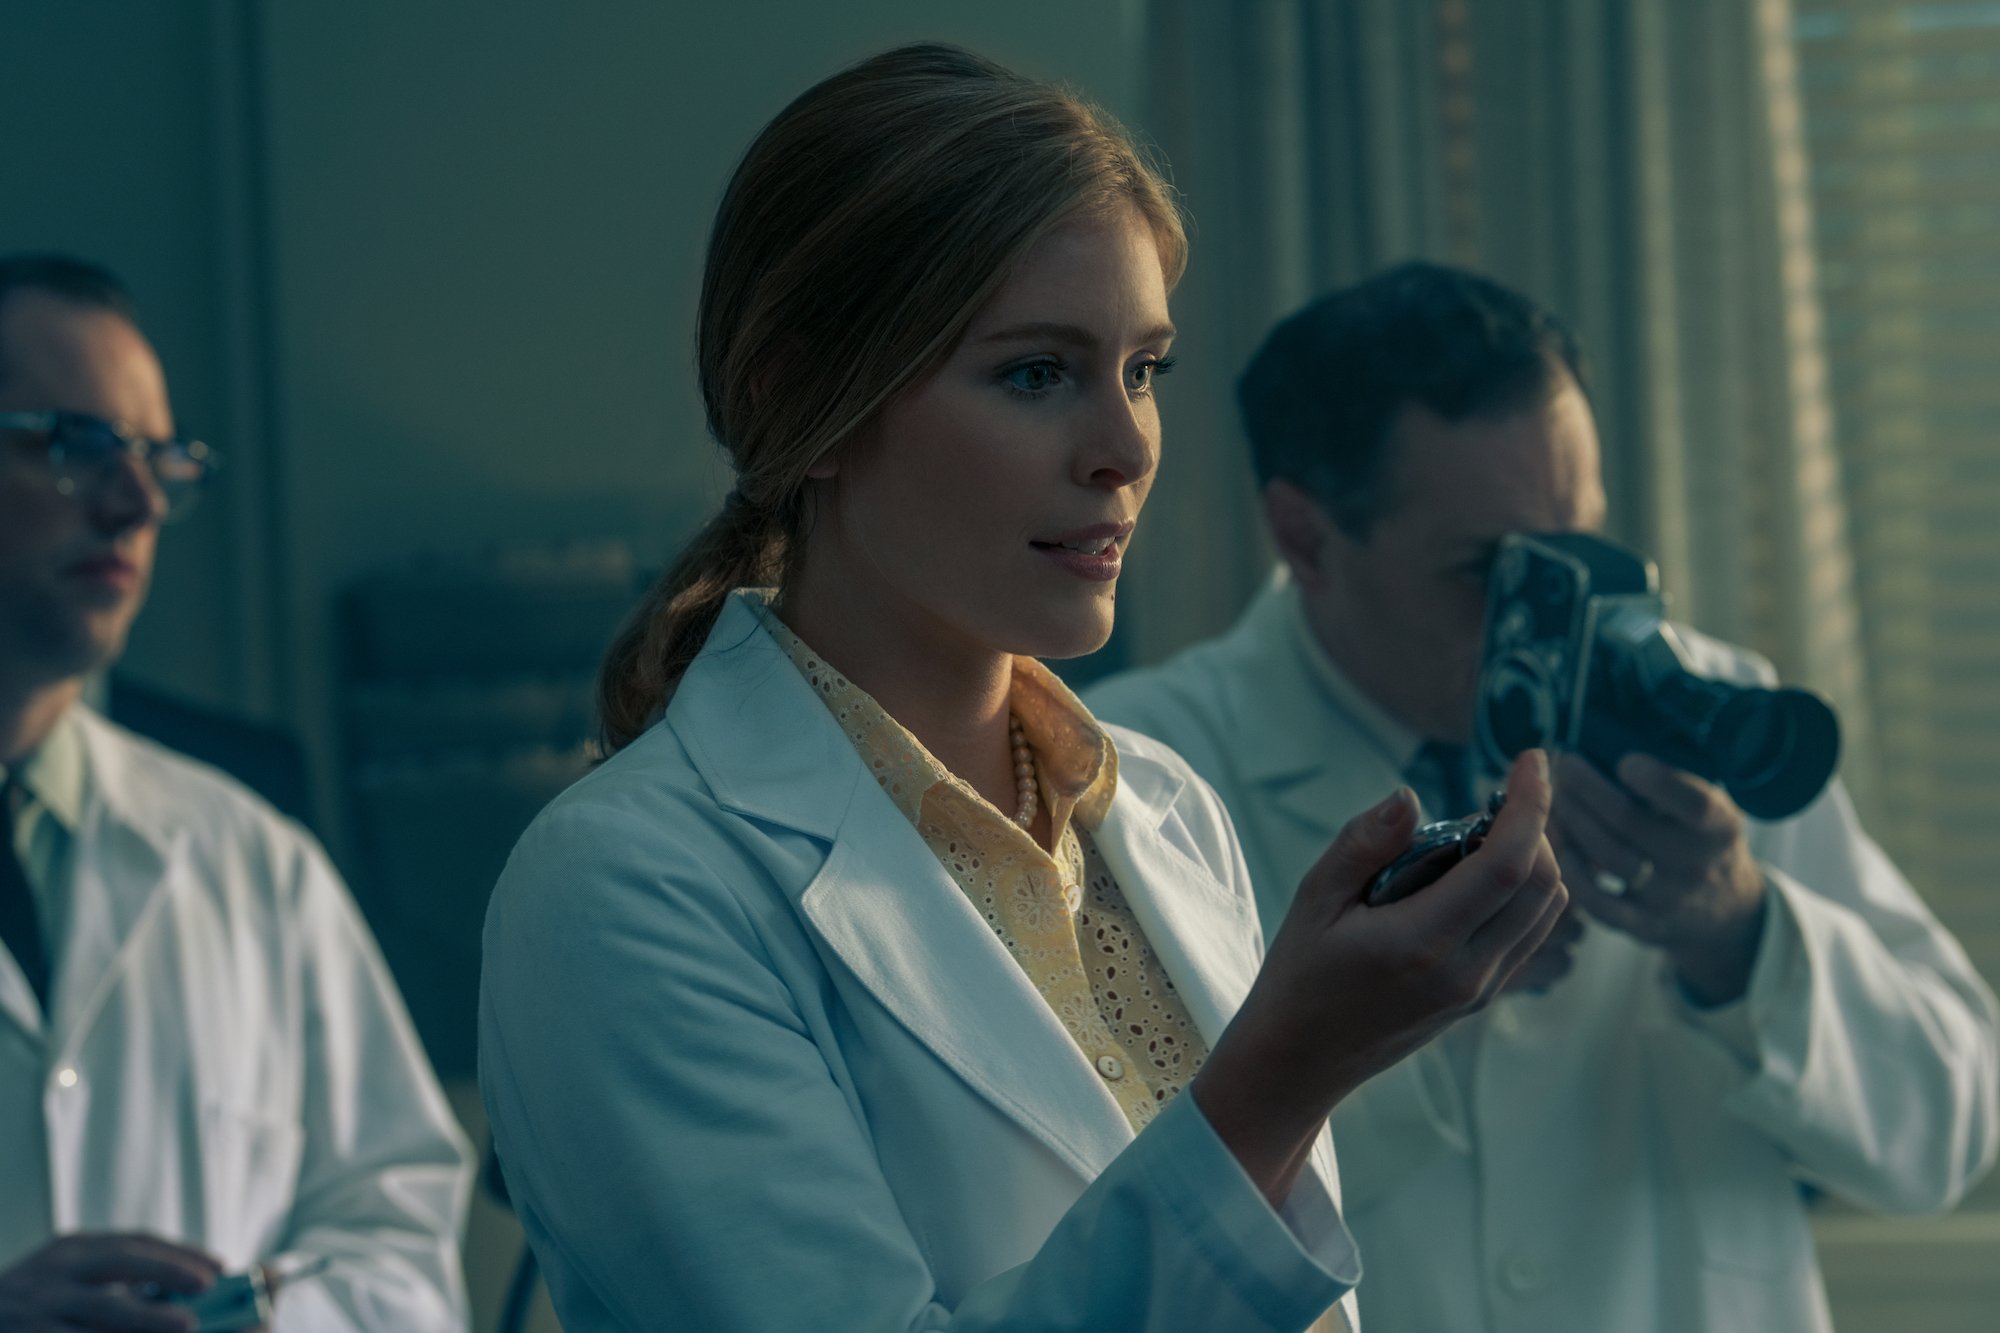 'The Umbrella Academy' character Grace, played by Jordan Claire Robbins, seen here in a production still wearing a lab coat in season 2.